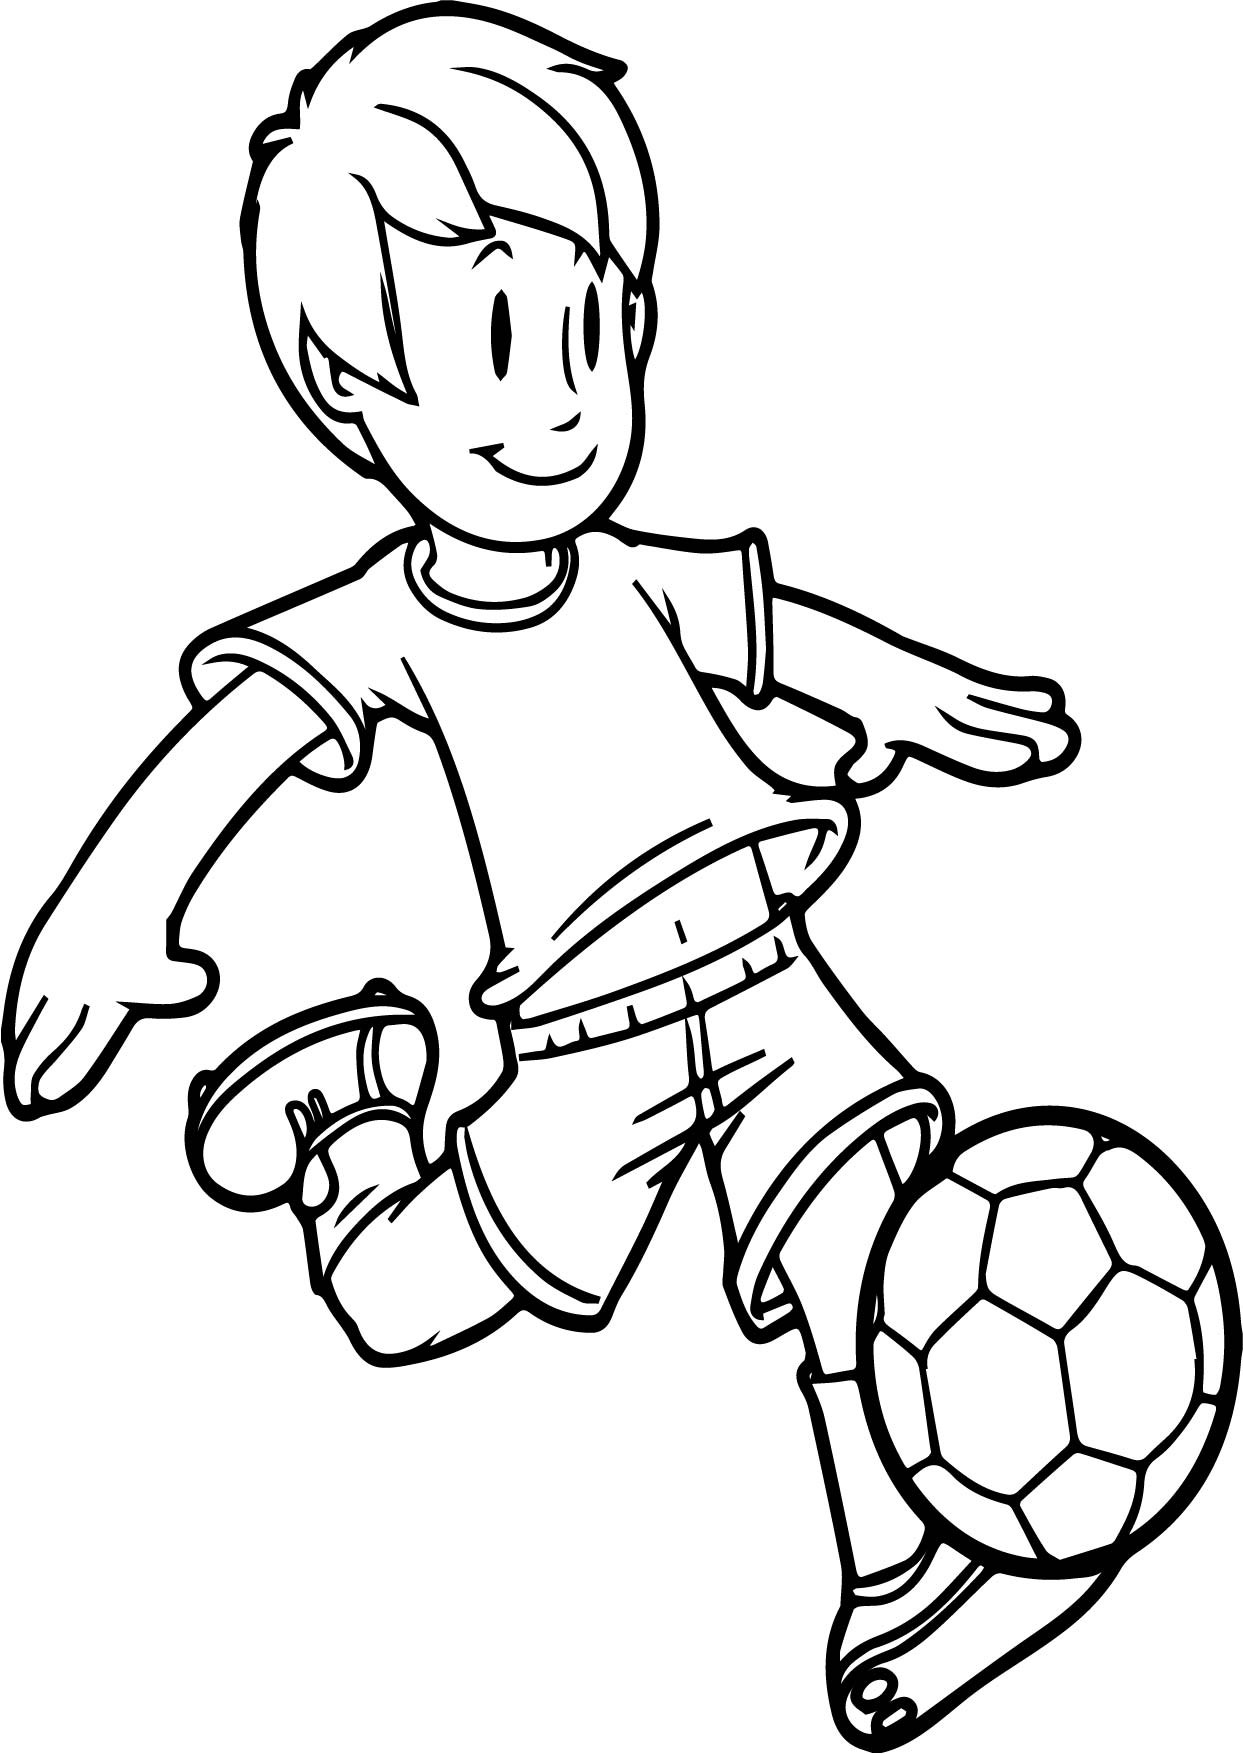 Easy Coloring Pages For Boys
 Soccer Drawing at GetDrawings